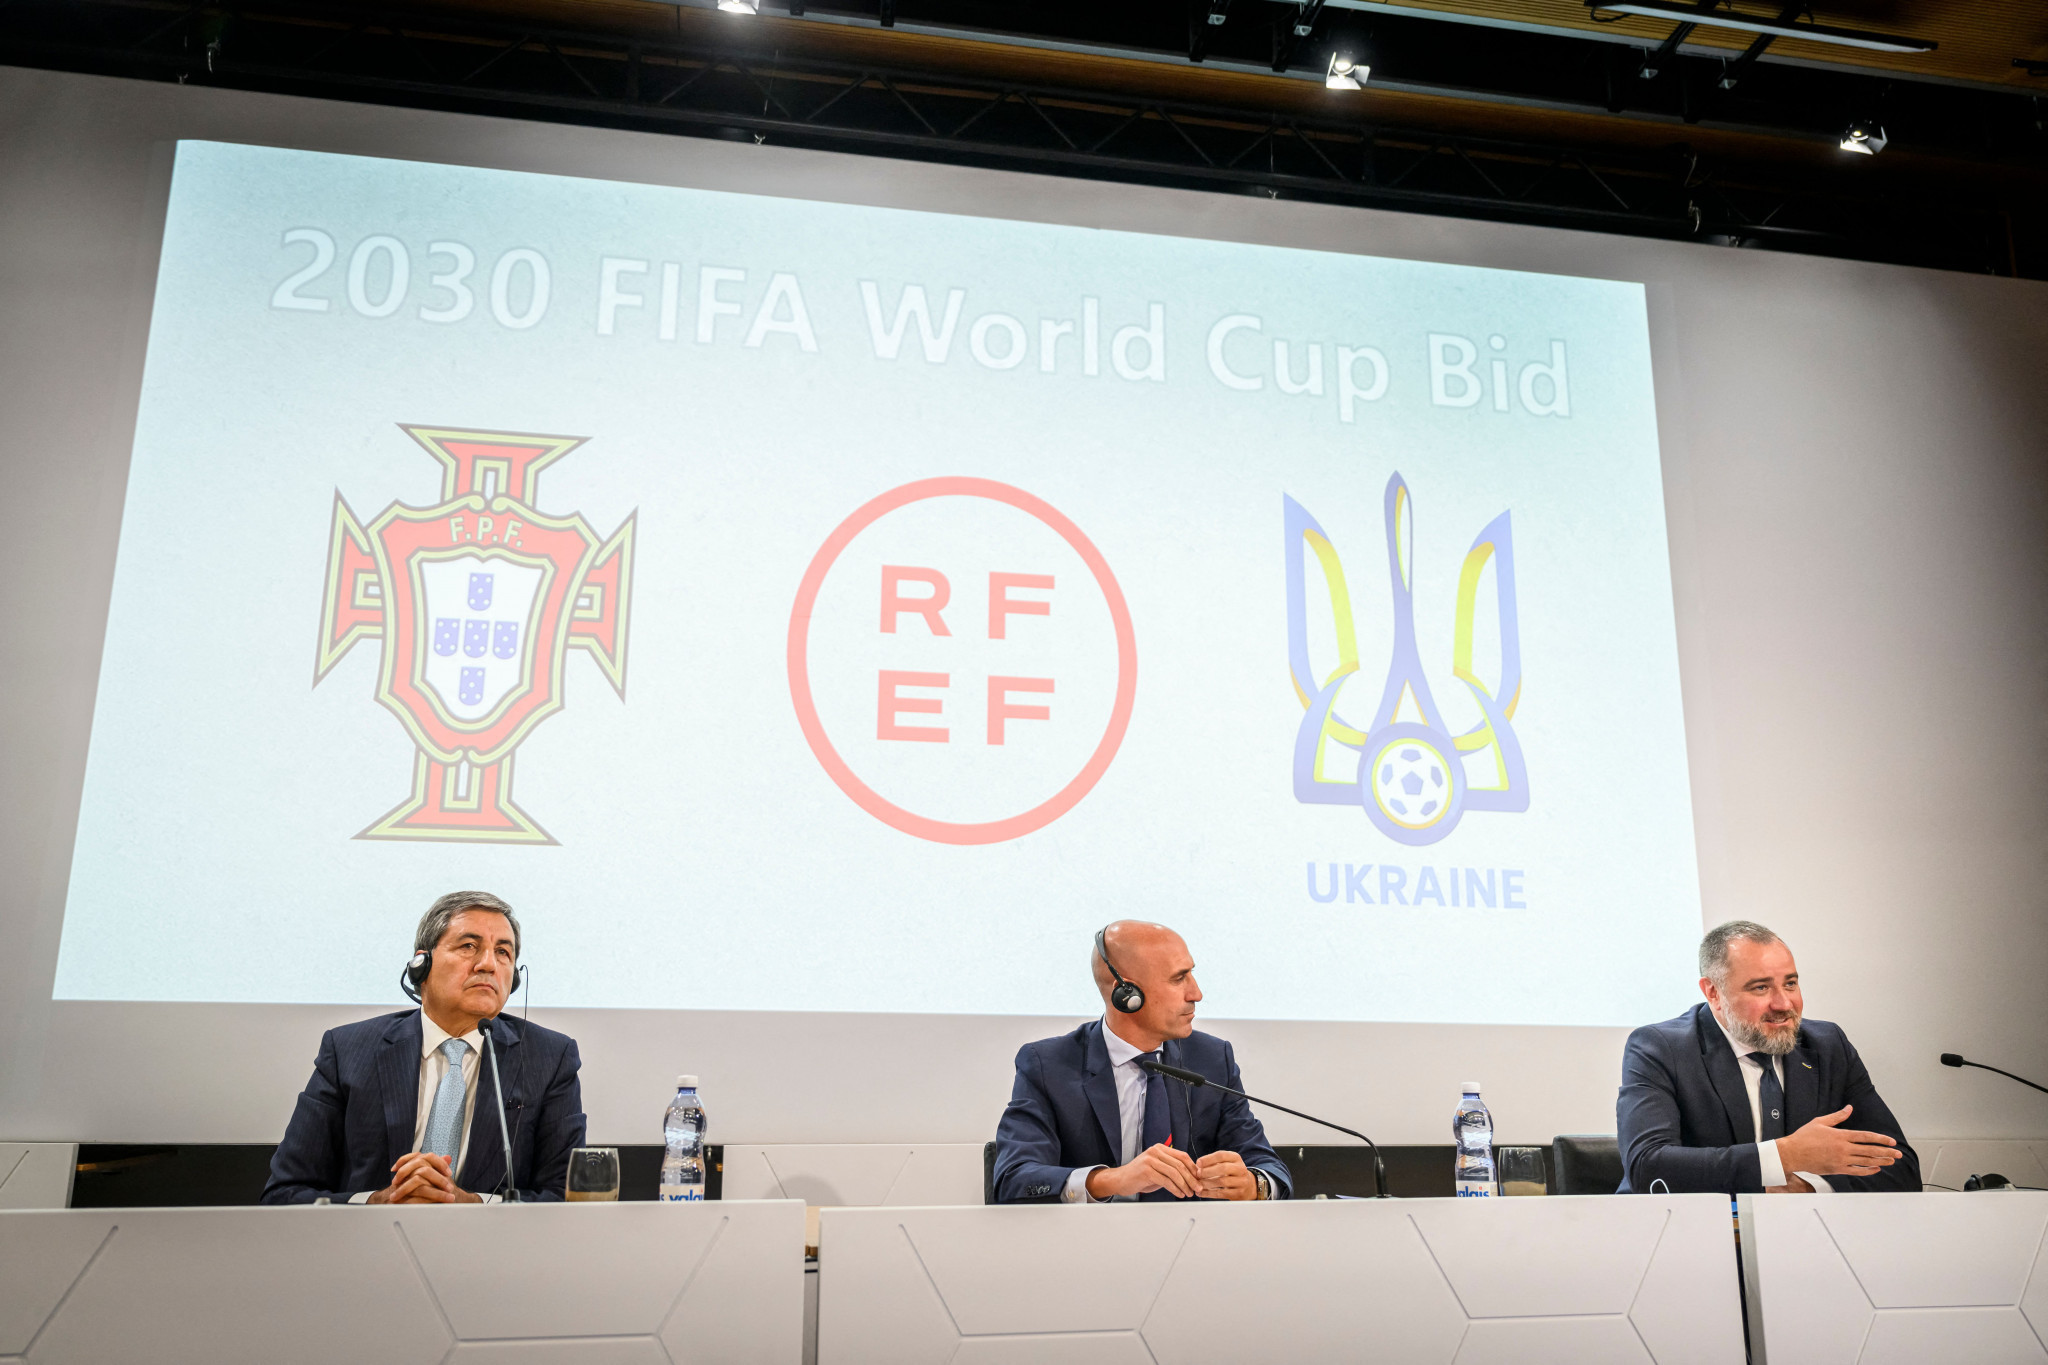 it had been claimed Ukraine's addition to the 2030 World Cup bid would 